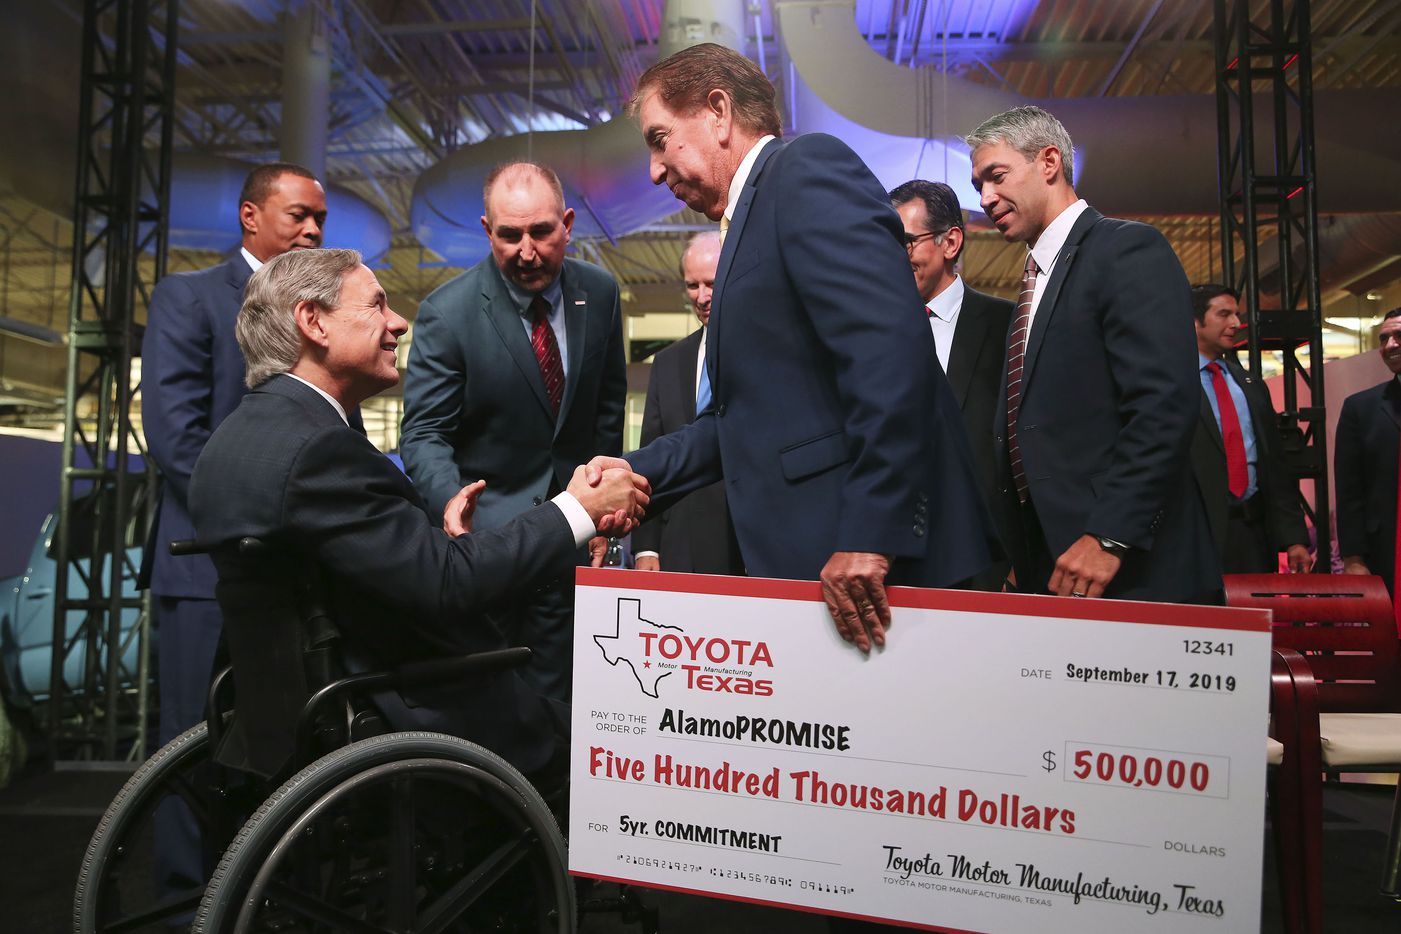 Alamo Colleges District Board of Directors Vice-President Joe Alderete, Jr. shakes hands with Texas Gov. Greg Abbott after an event announcing a $391 million expansion at the San Antonio Toyota plant, Tuesday, Sept. 17, 2019. The district's AlamoPROMISE program will received a $500,000 commitment from Toyota. 